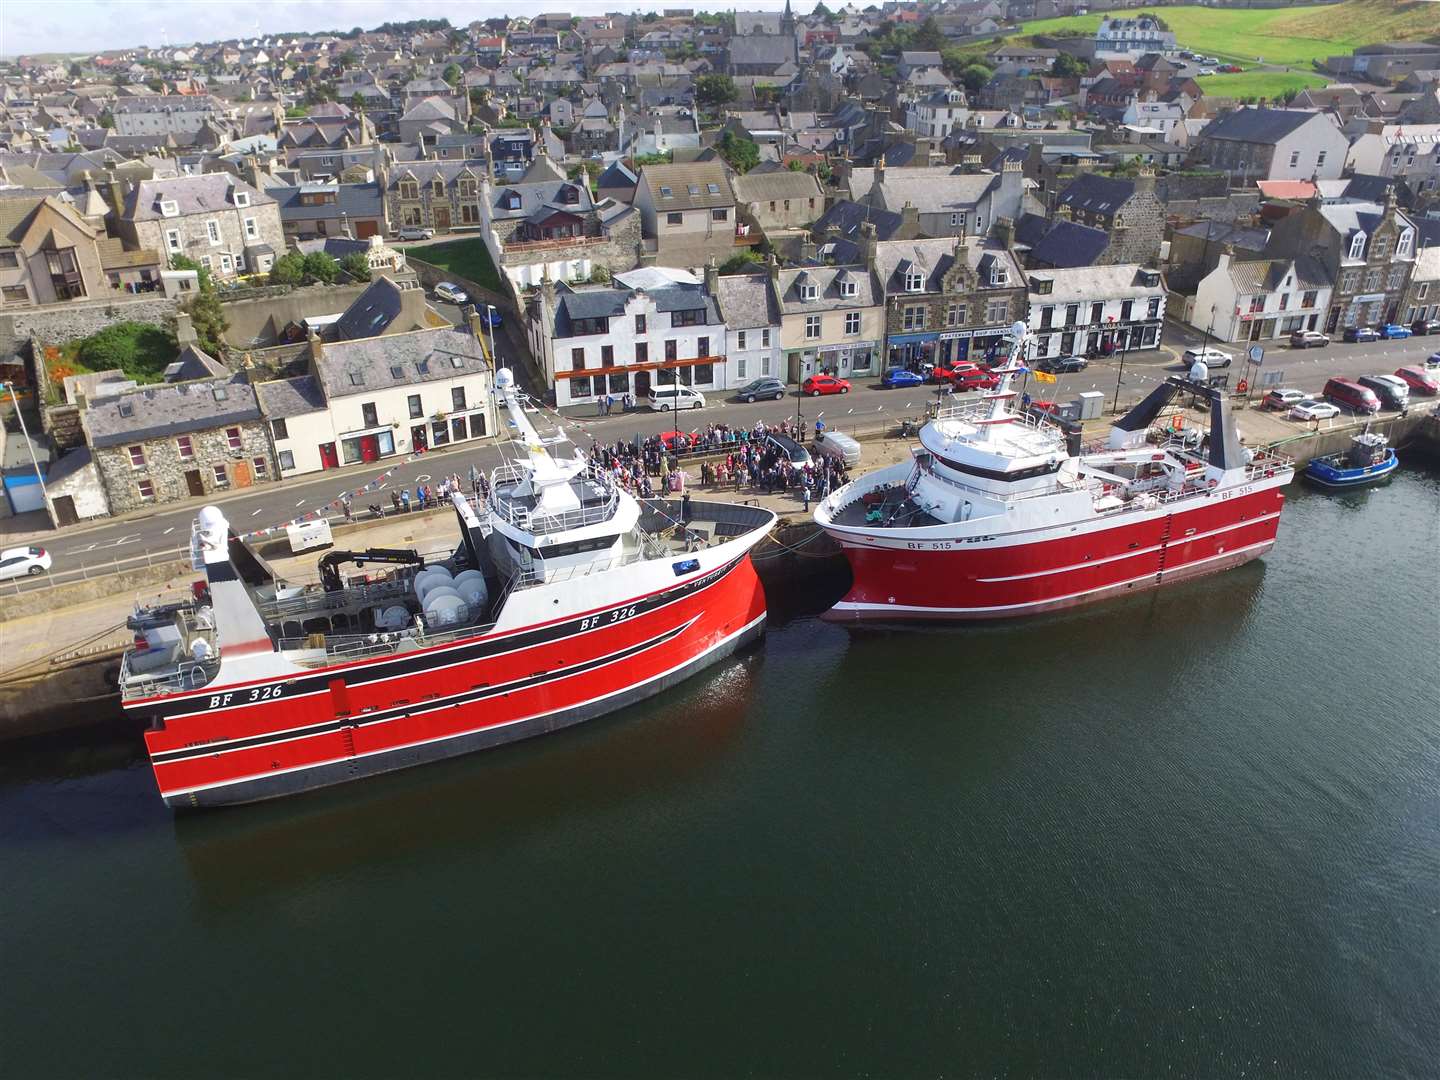 Endeavour V and Venture IV were named during a special ceremony at Macduff Harbour.